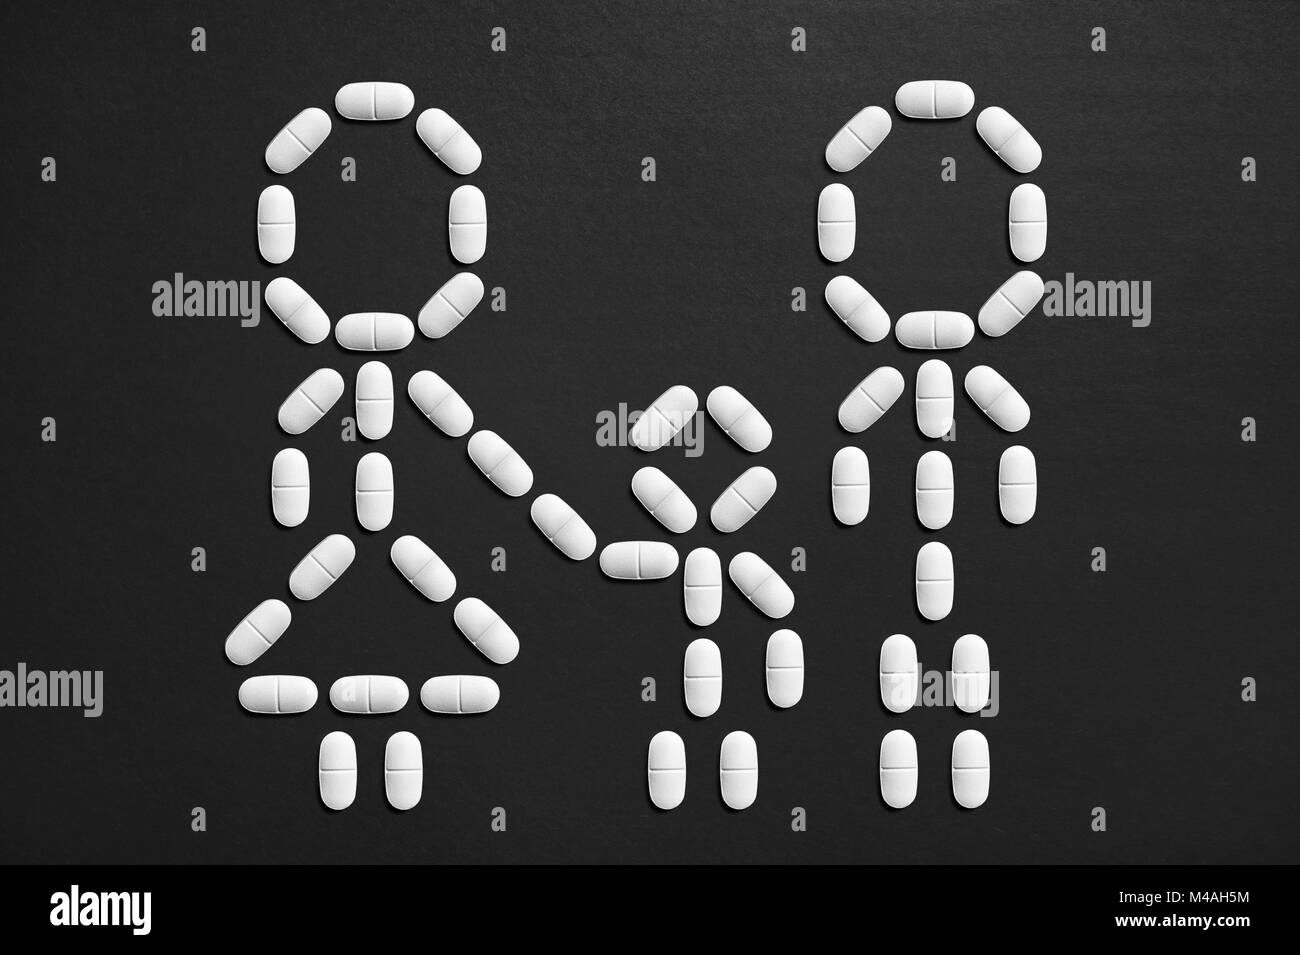 Family and kids health care. Pediatric and medical insurance concept. Stick figures made from pills. Stock Photo